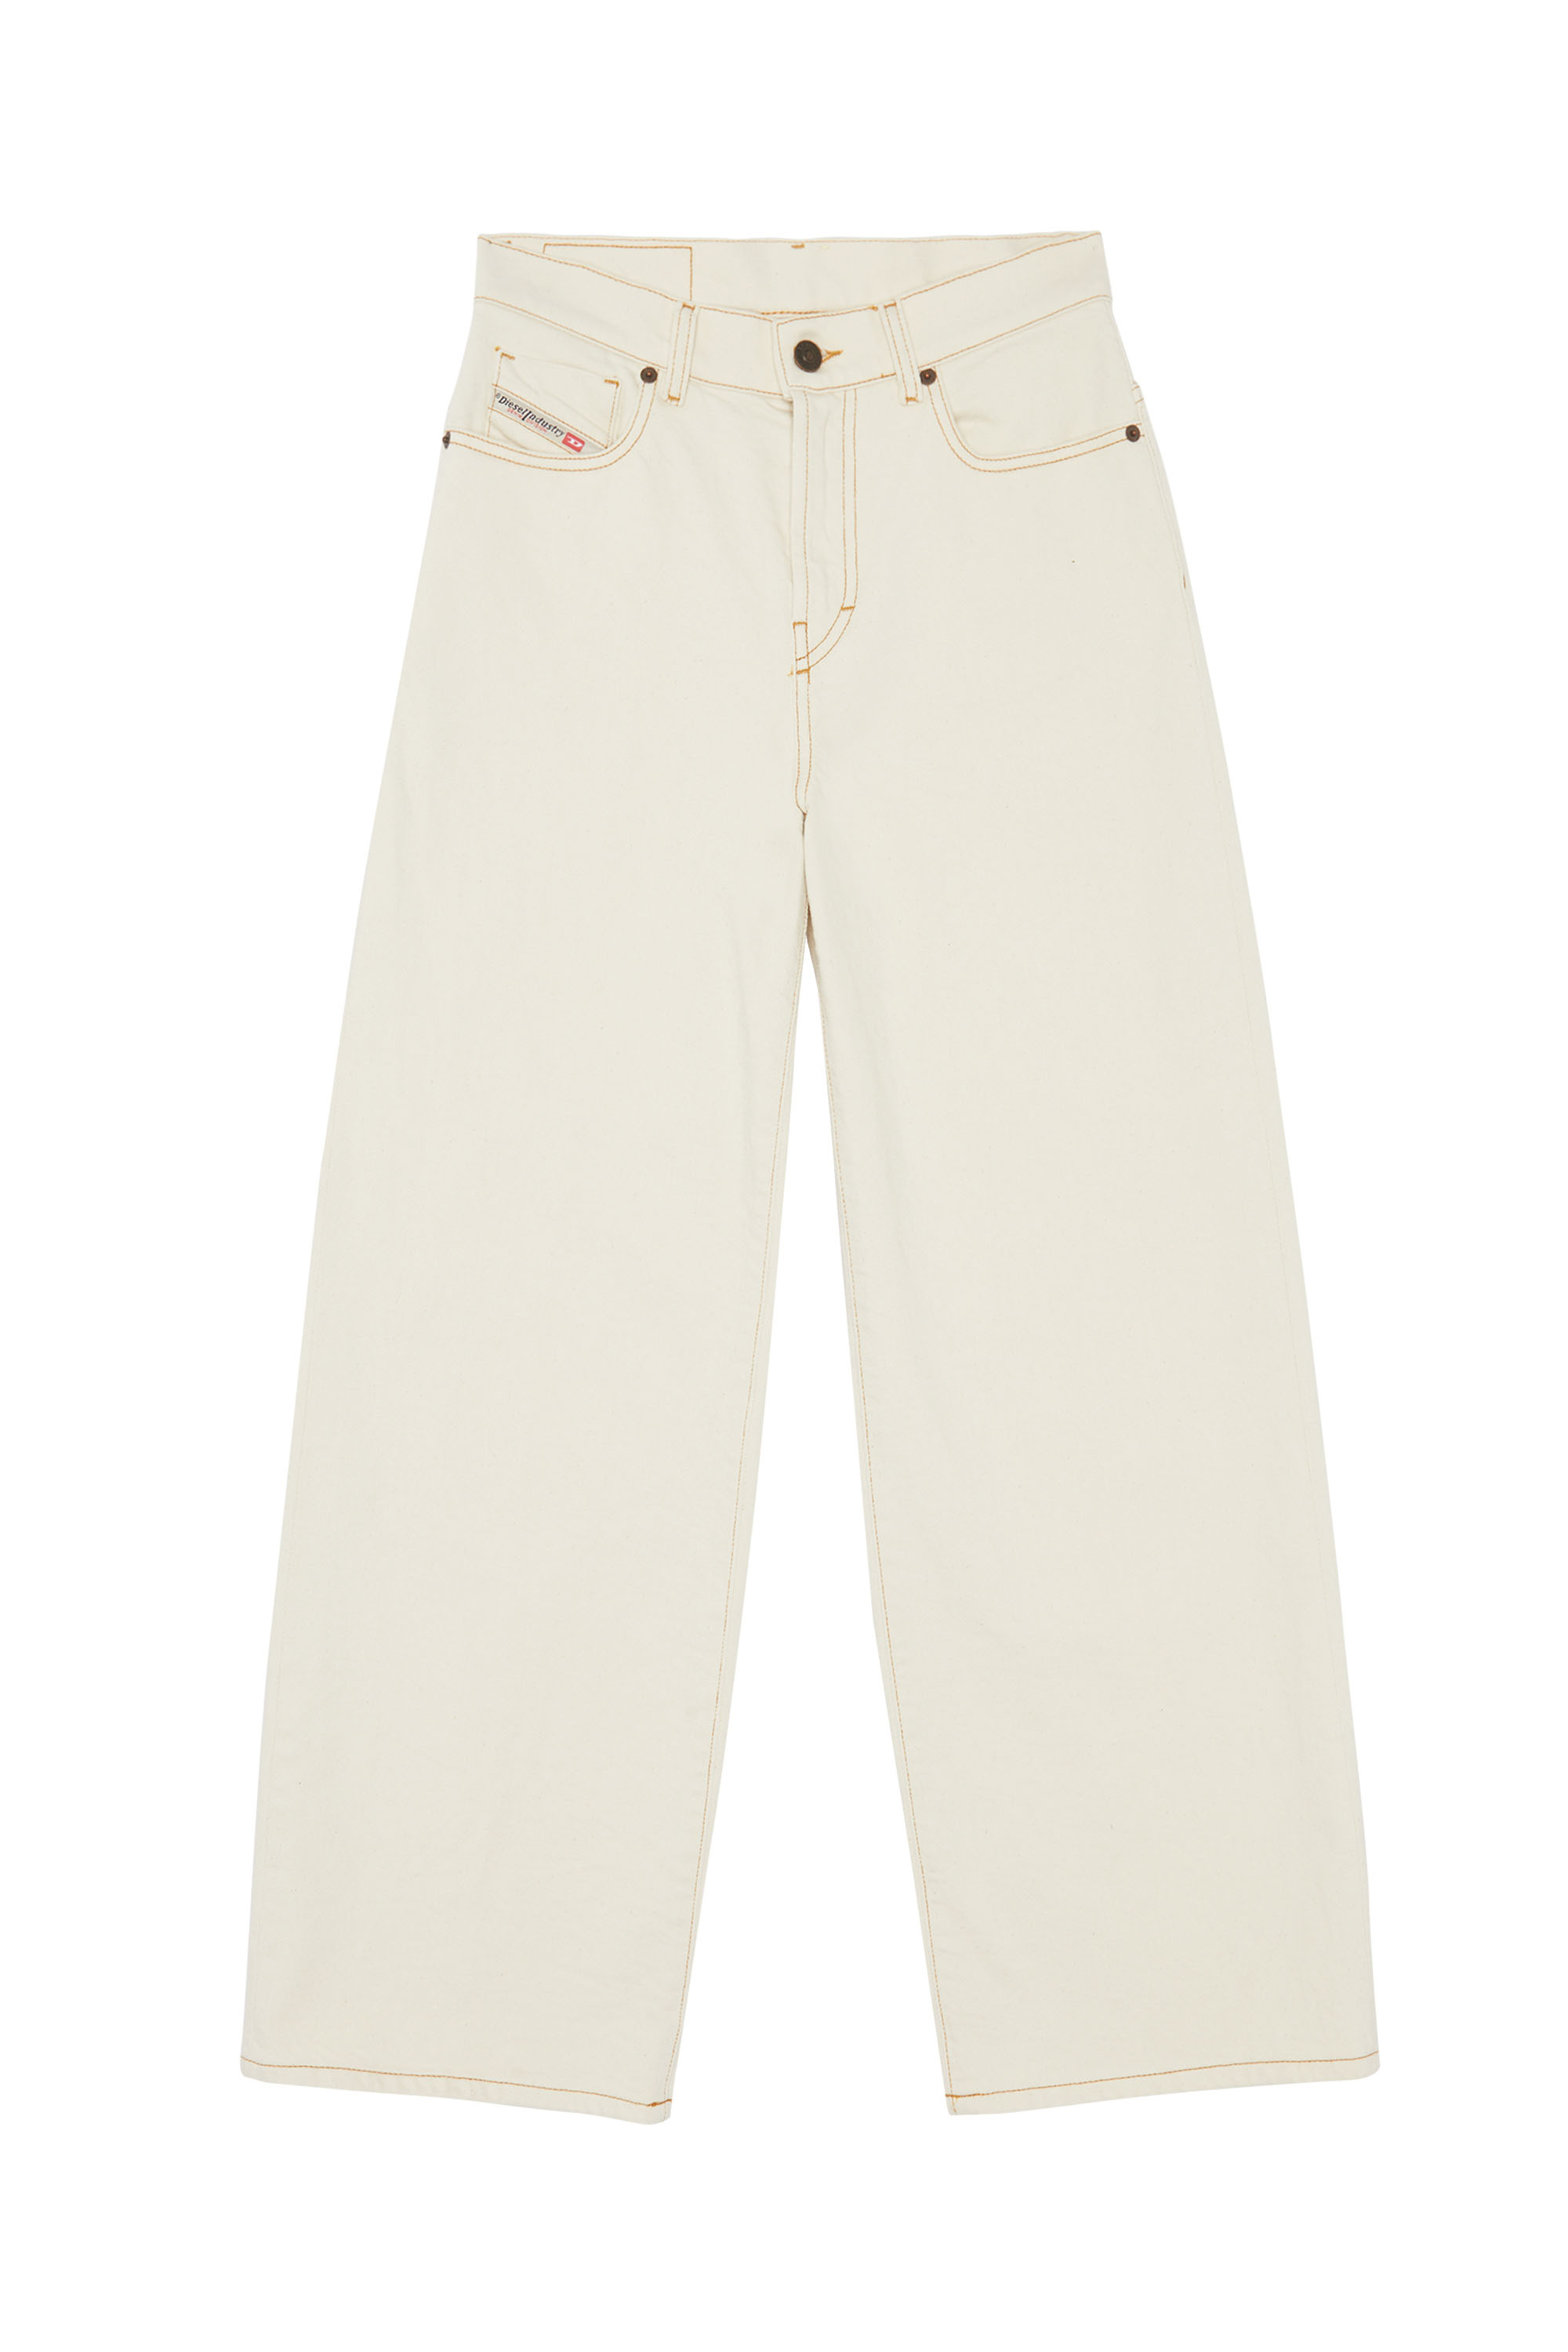 2000 WIDEE 09B94 Bootcut and Flare Jeans, White - Jeans